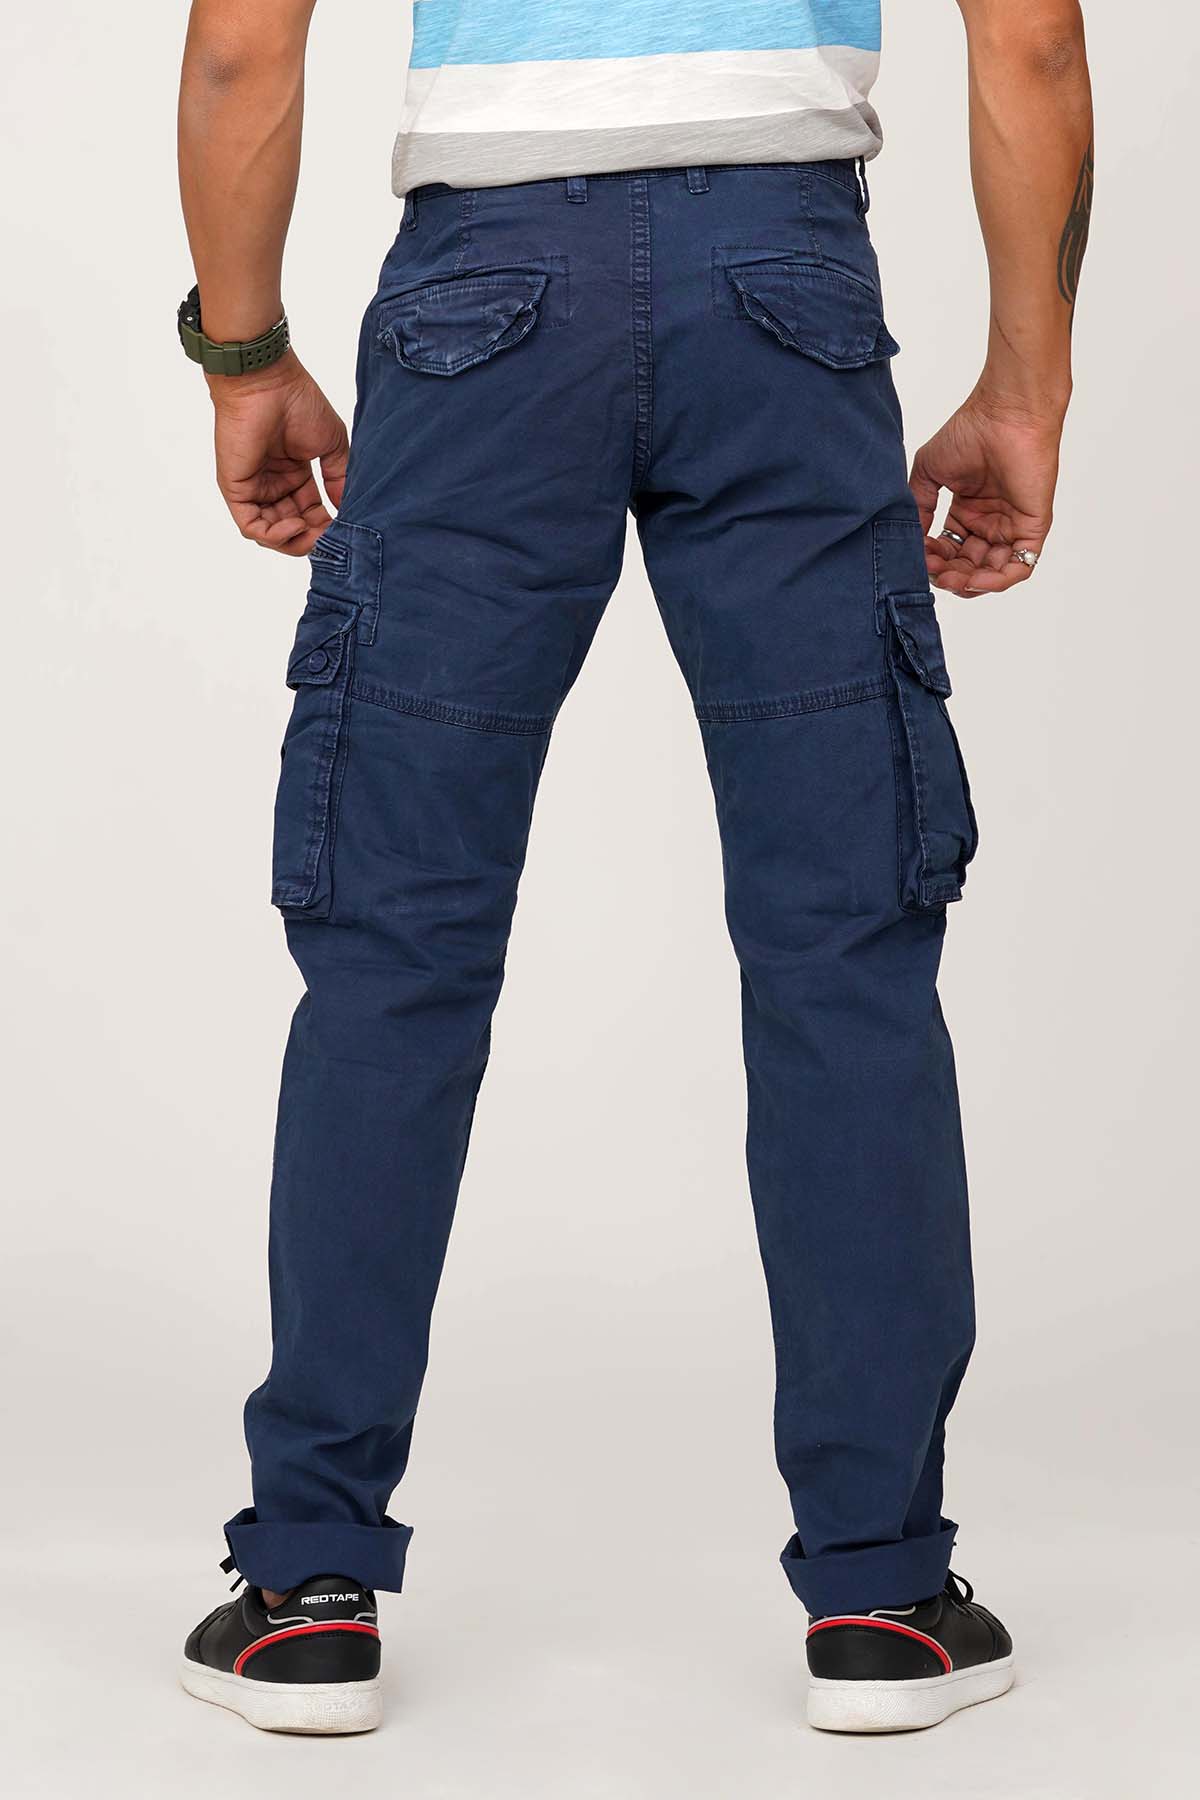 Buy PAUL  SHARK FlatFront Cargo Trousers with Insert Pockets  Navy Blue  Color Men  AJIO LUXE